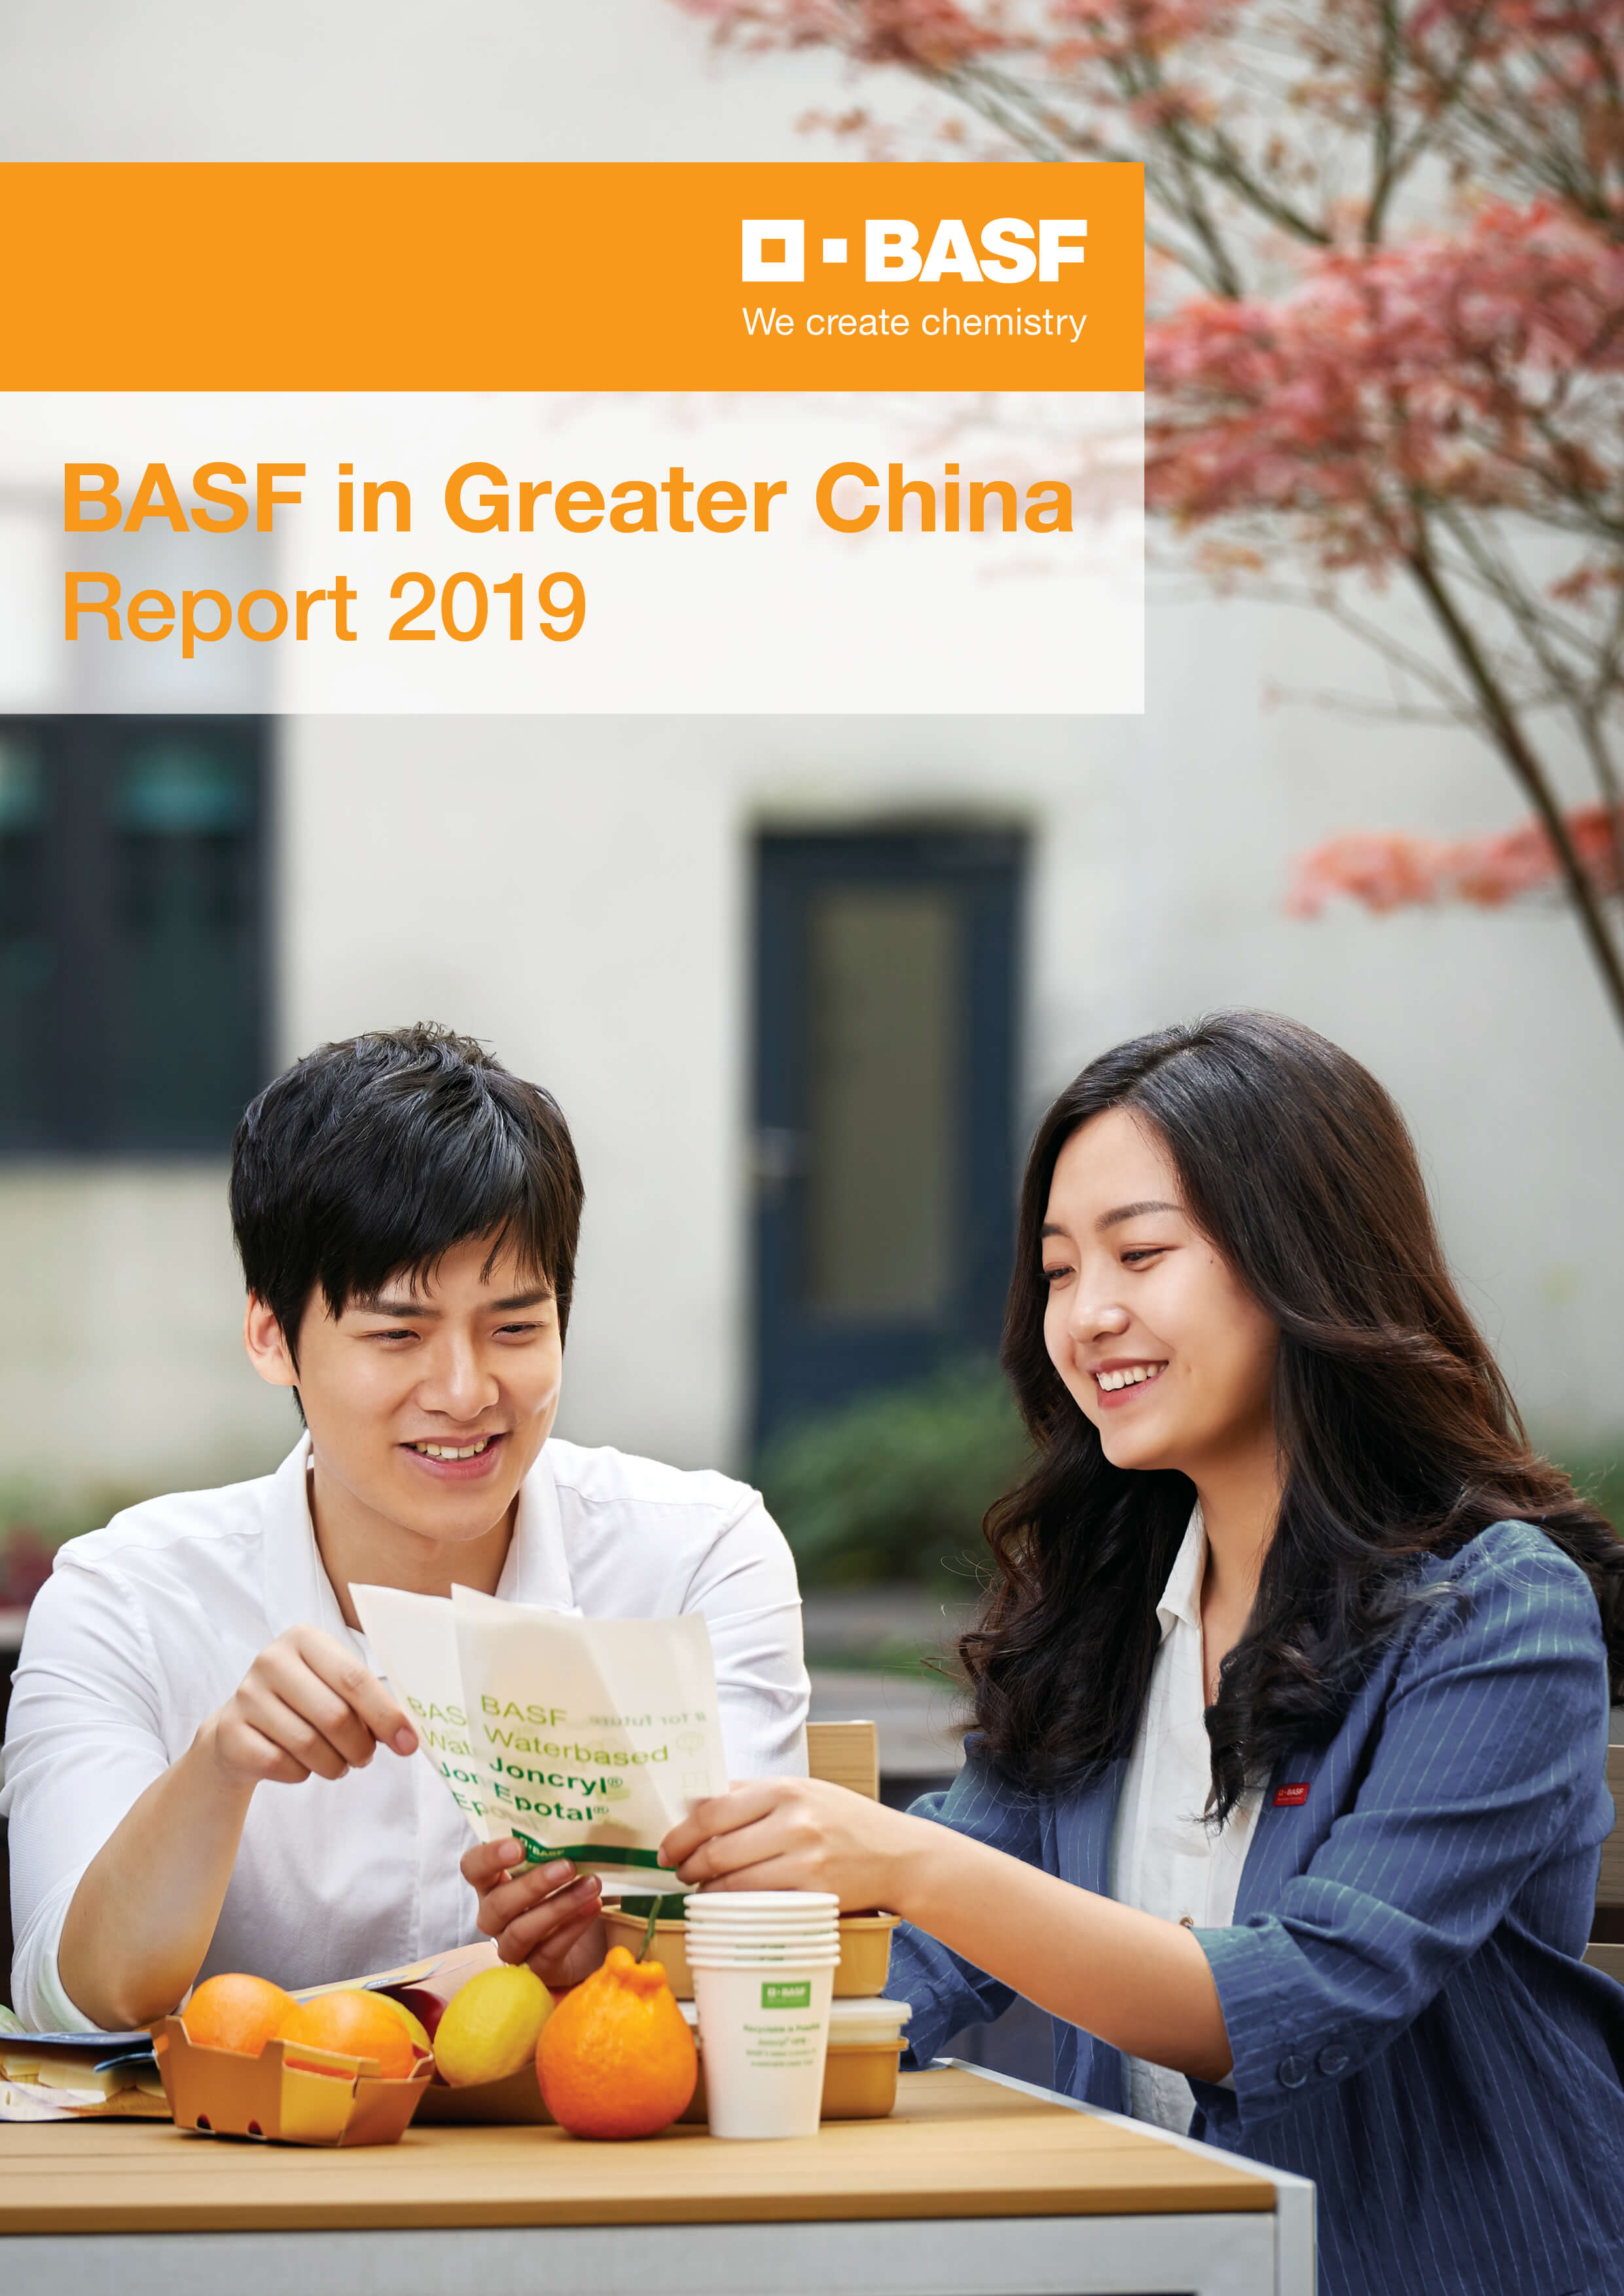 basf publishes annual report in greater china for 12th consecutive year direct method and indirect cash flow